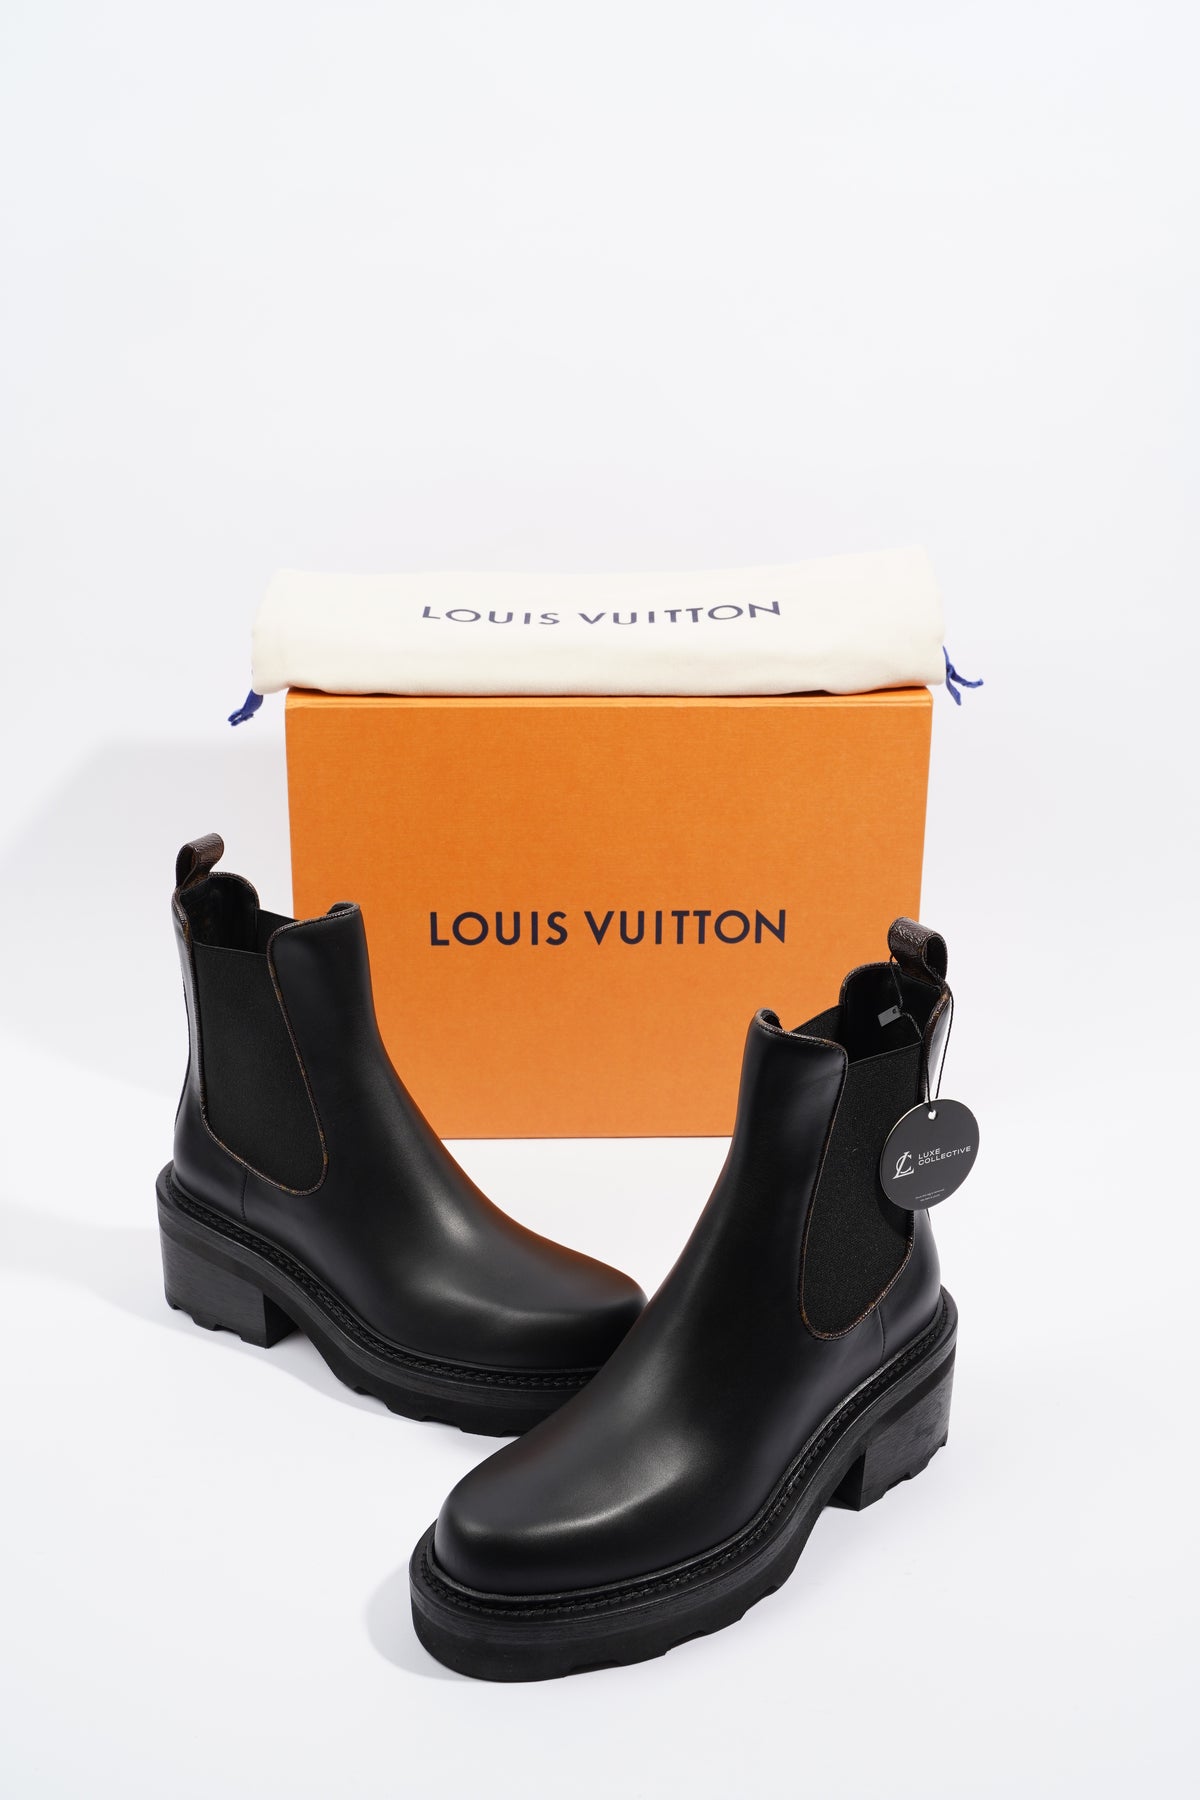 Lv beaubourg leather ankle boots Louis Vuitton Black size 39 EU in